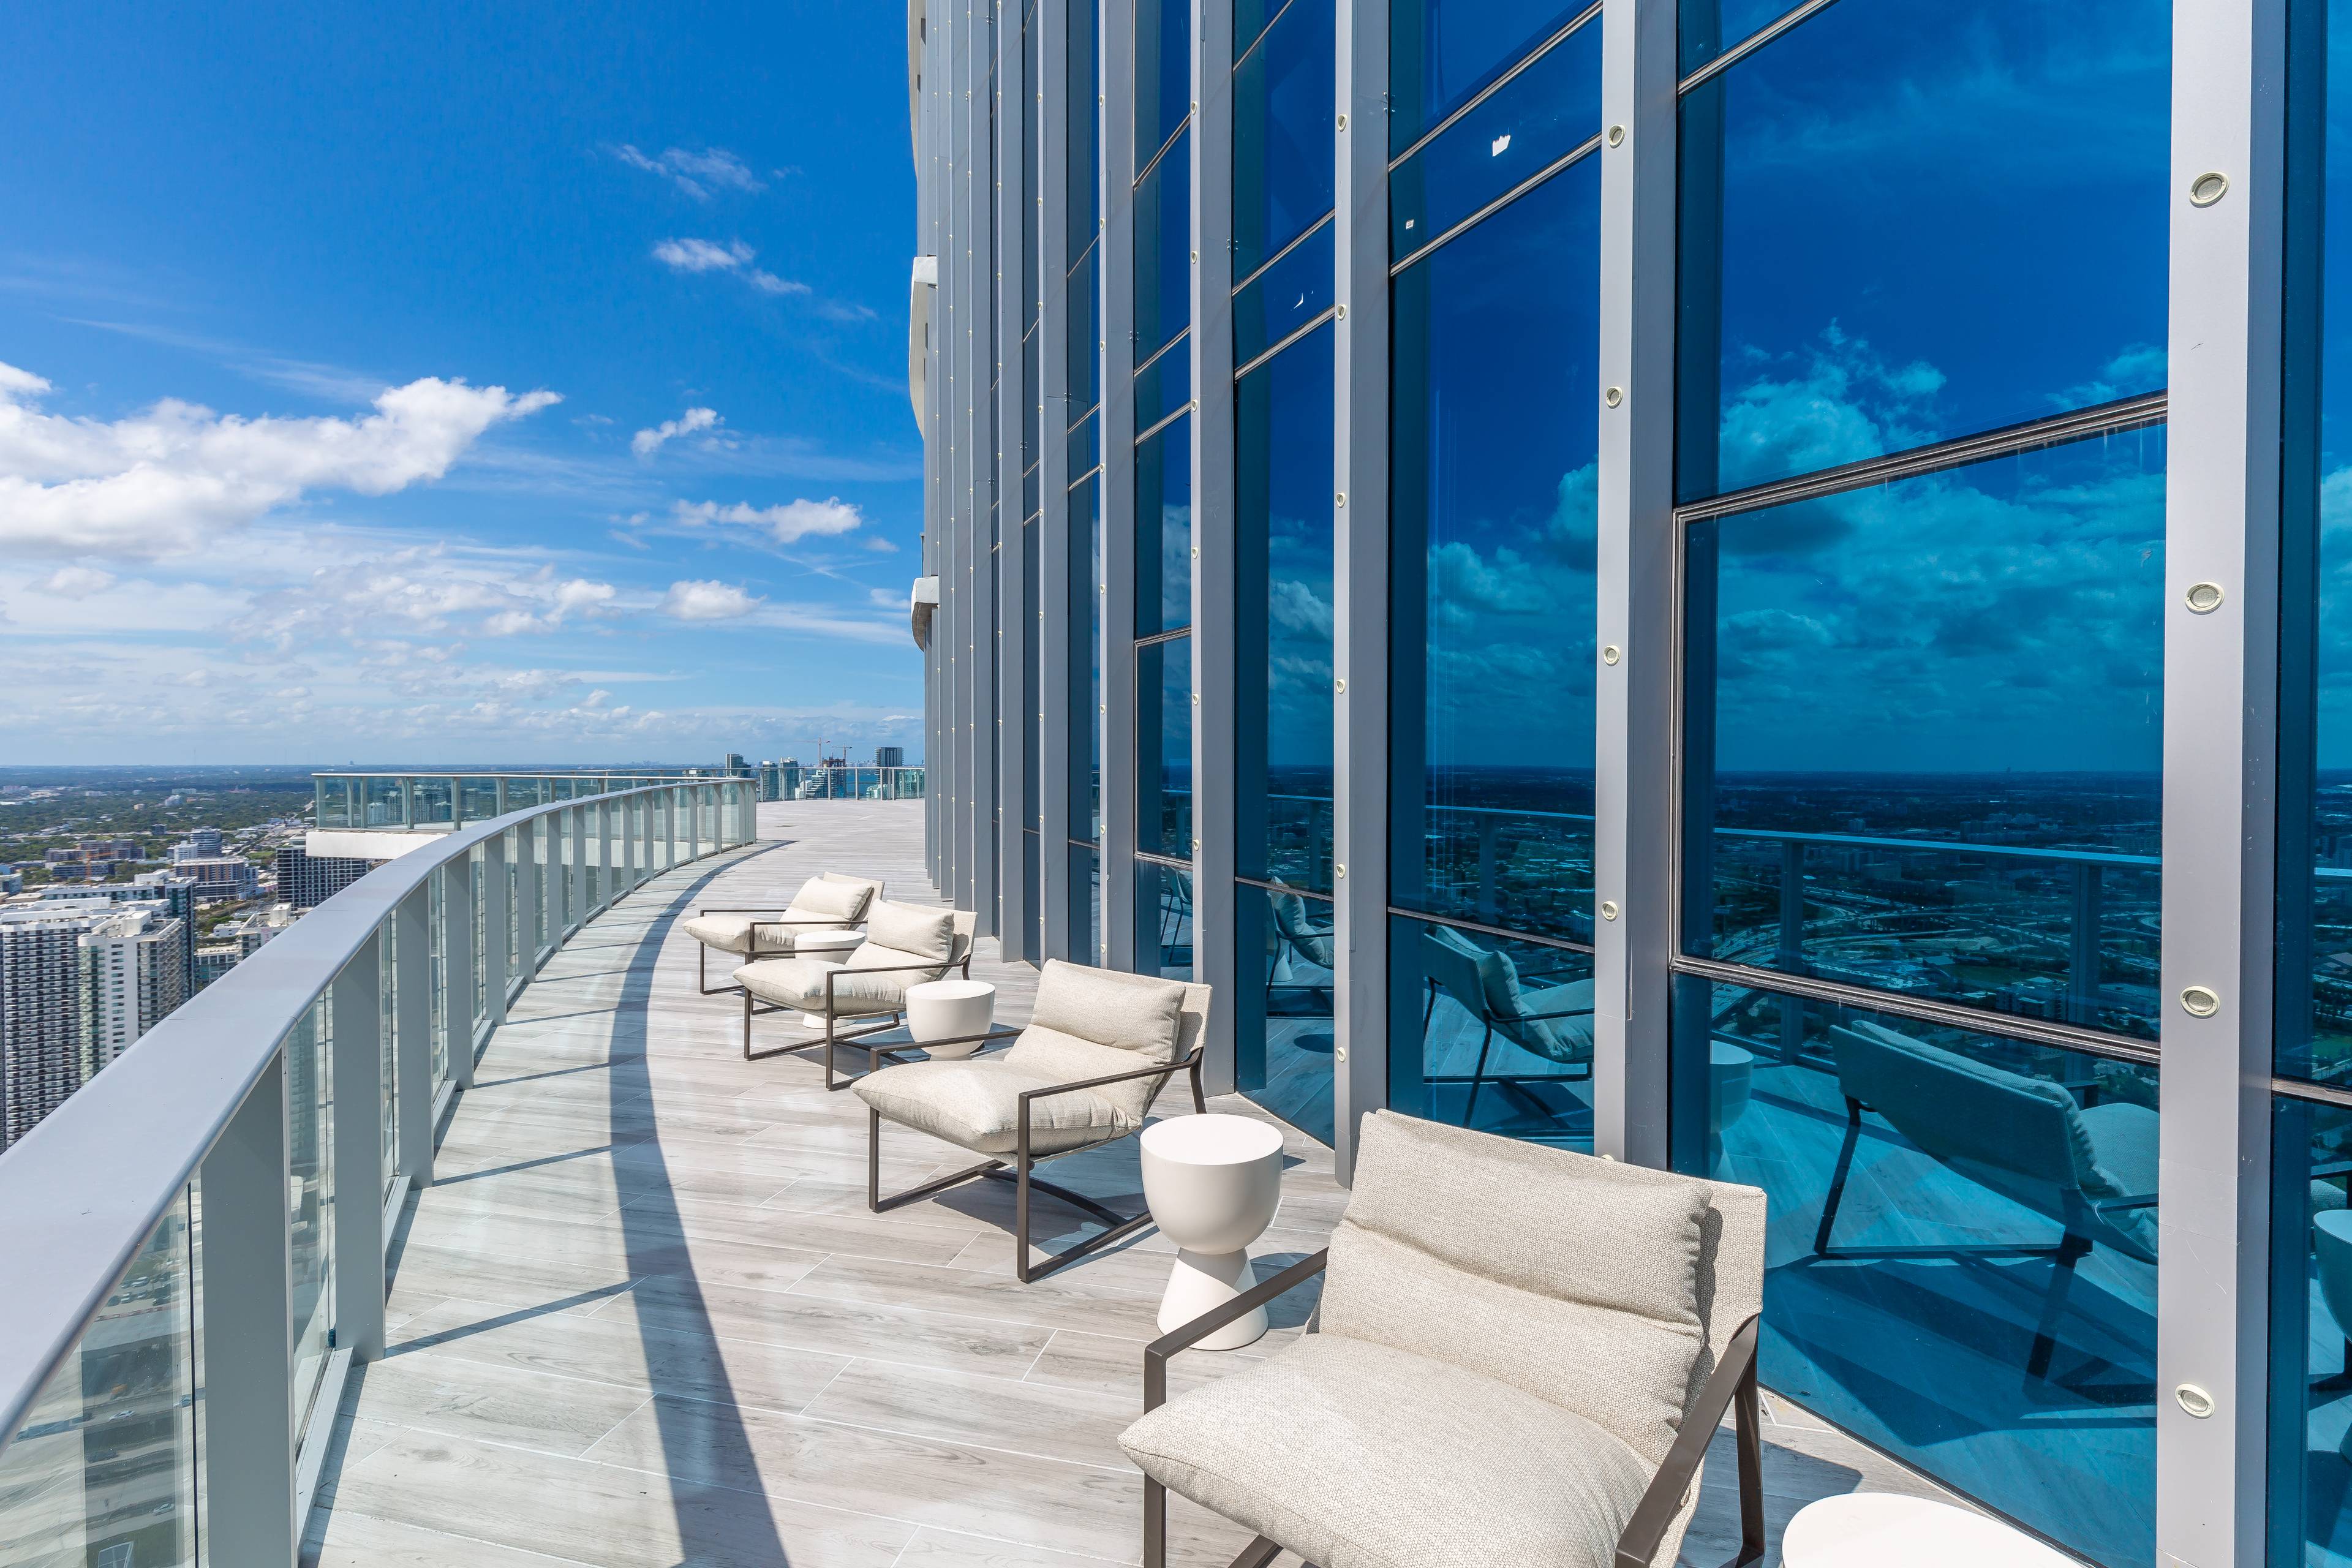 LUXURY DOWNTOWN MIAMI PENTHOUSE WITH PRIVATE ELEVATOR,  TERRACE AND BREATHTAKING CITY AND SKY VIEWS